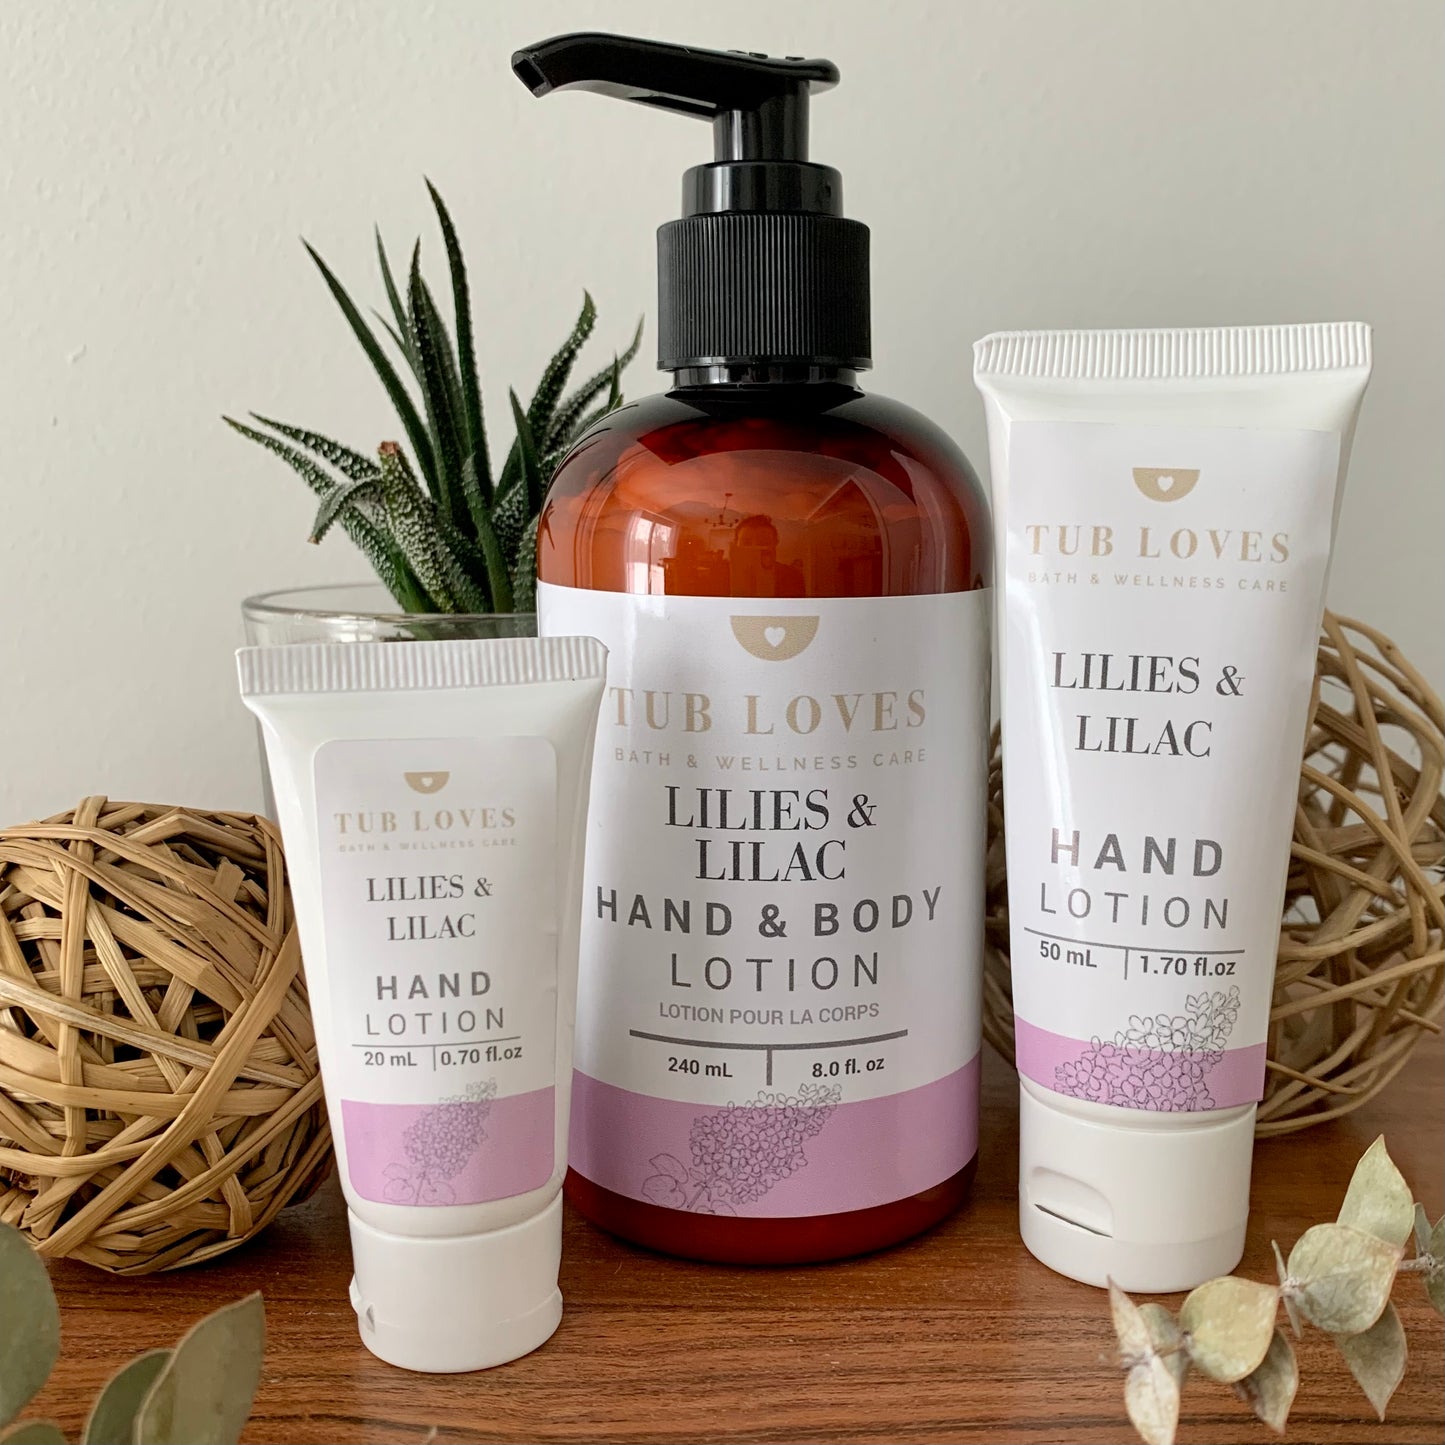 Lilies & Lilac - Hand Lotion